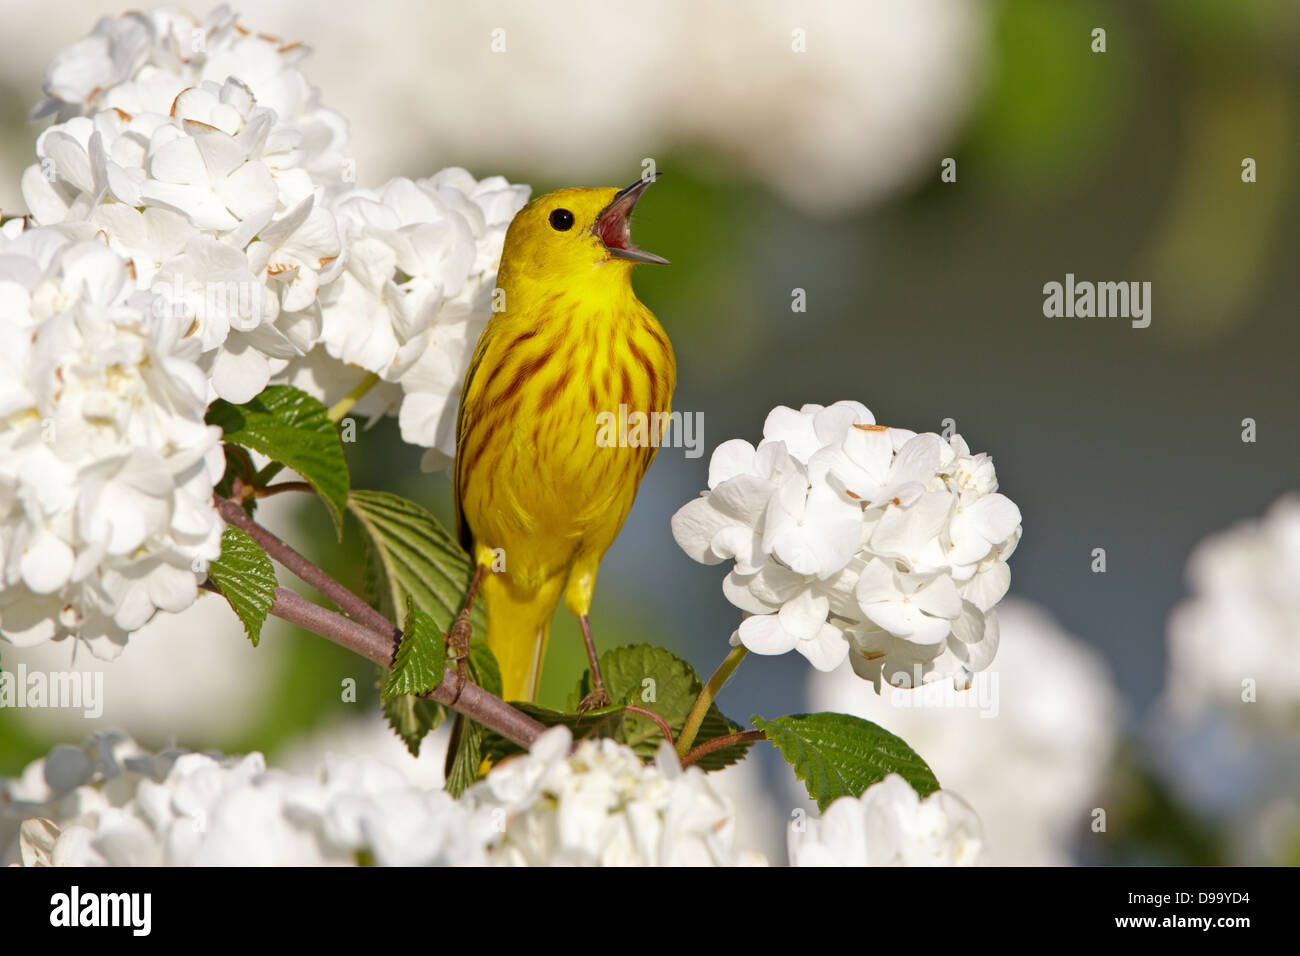 Yellow Warbler singing in Oakleaf Hydrangea Blossoms bird songbird Ornithology Science Nature Wildlife Environment Stock Photo